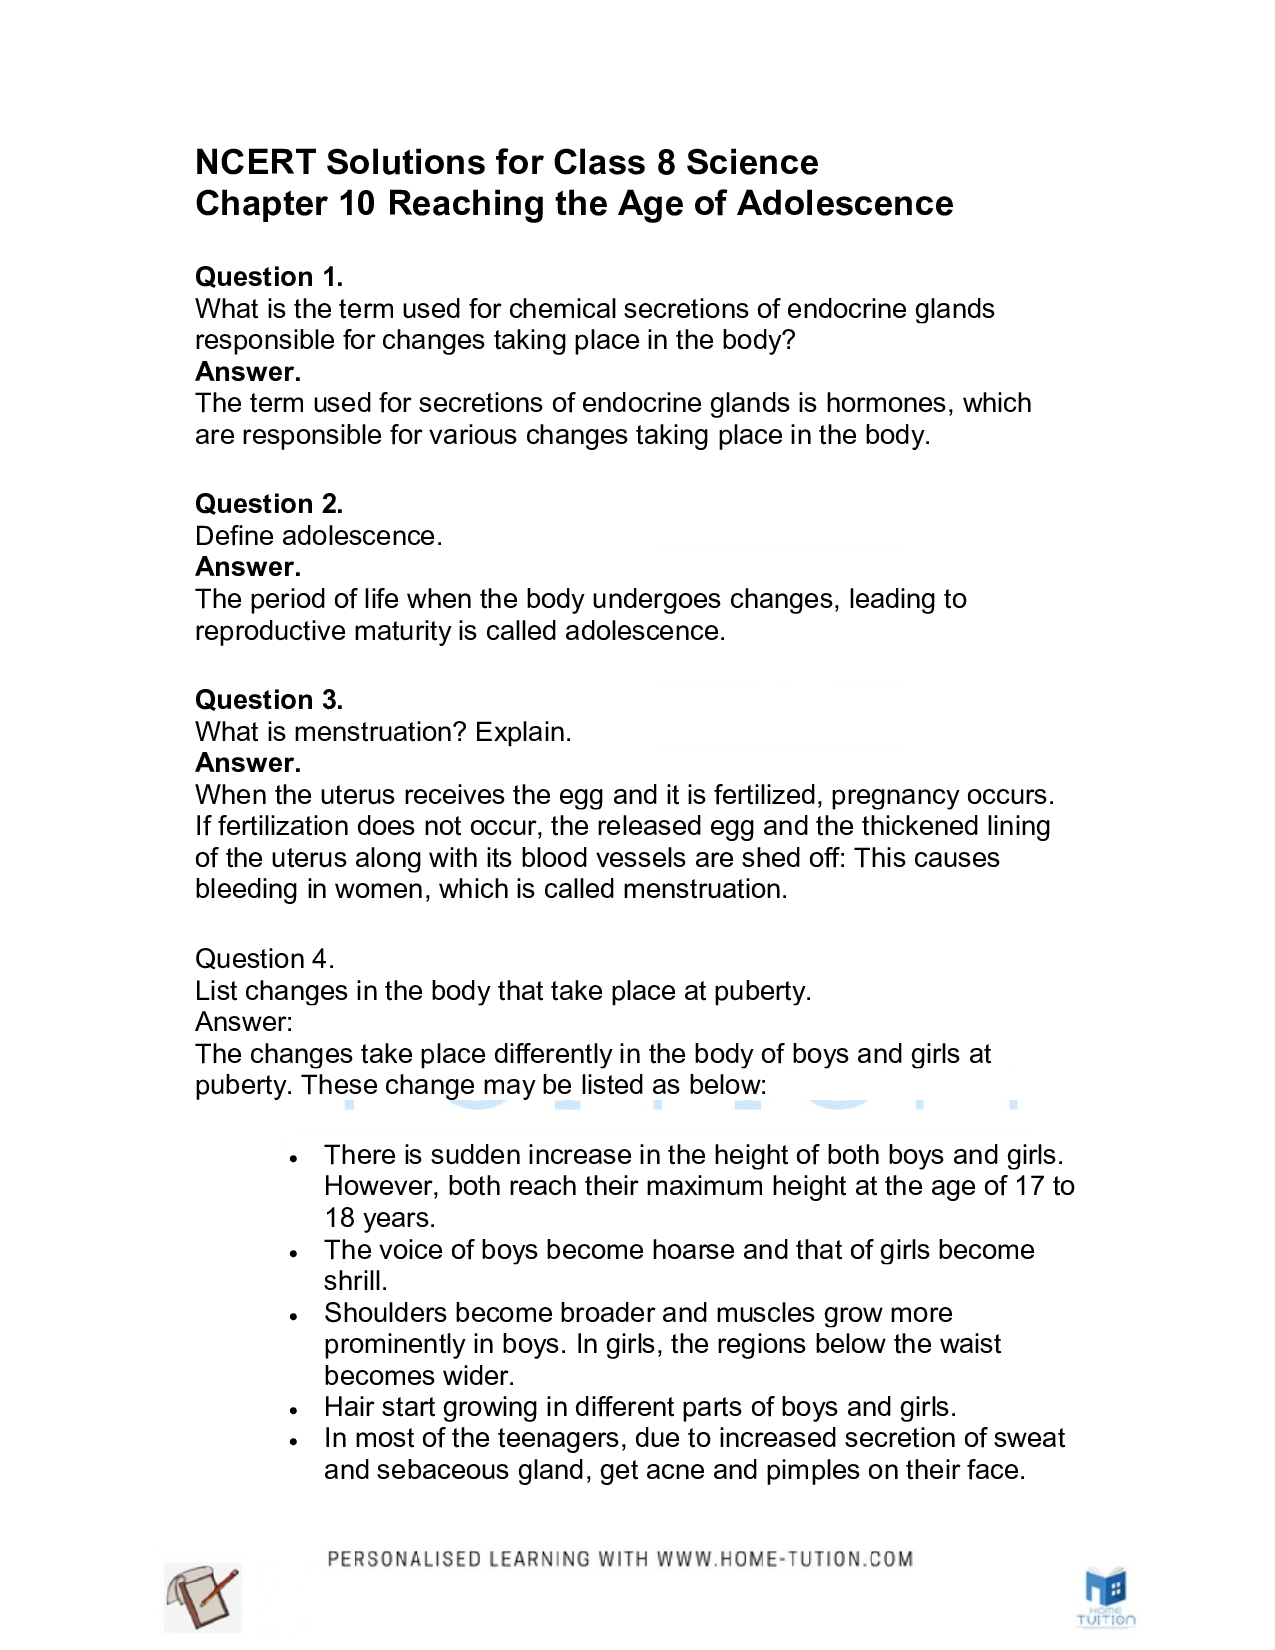 Class 8 Science Chapter 10 Reaching the Age of Adolescence